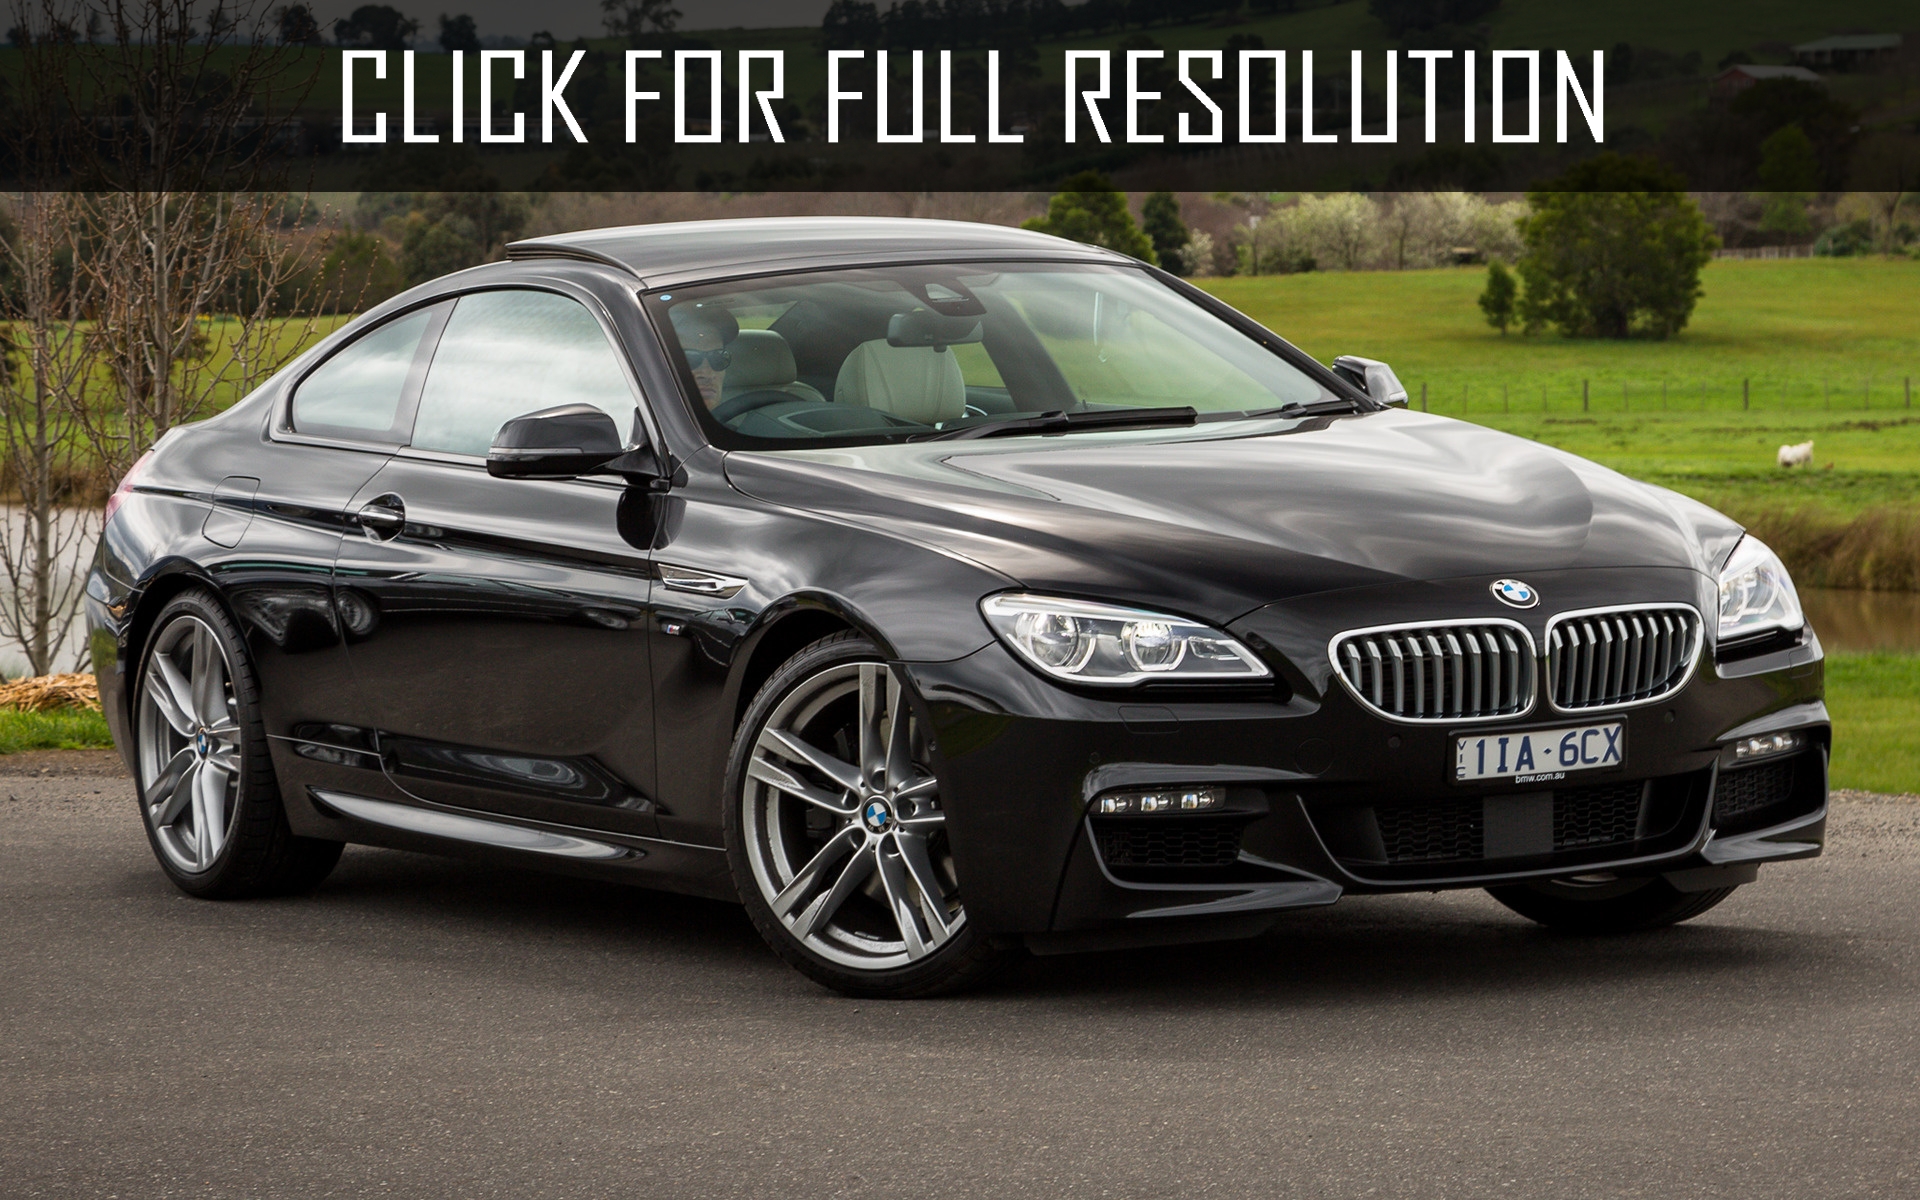 Bmw 650i M Sport amazing photo gallery, some information and